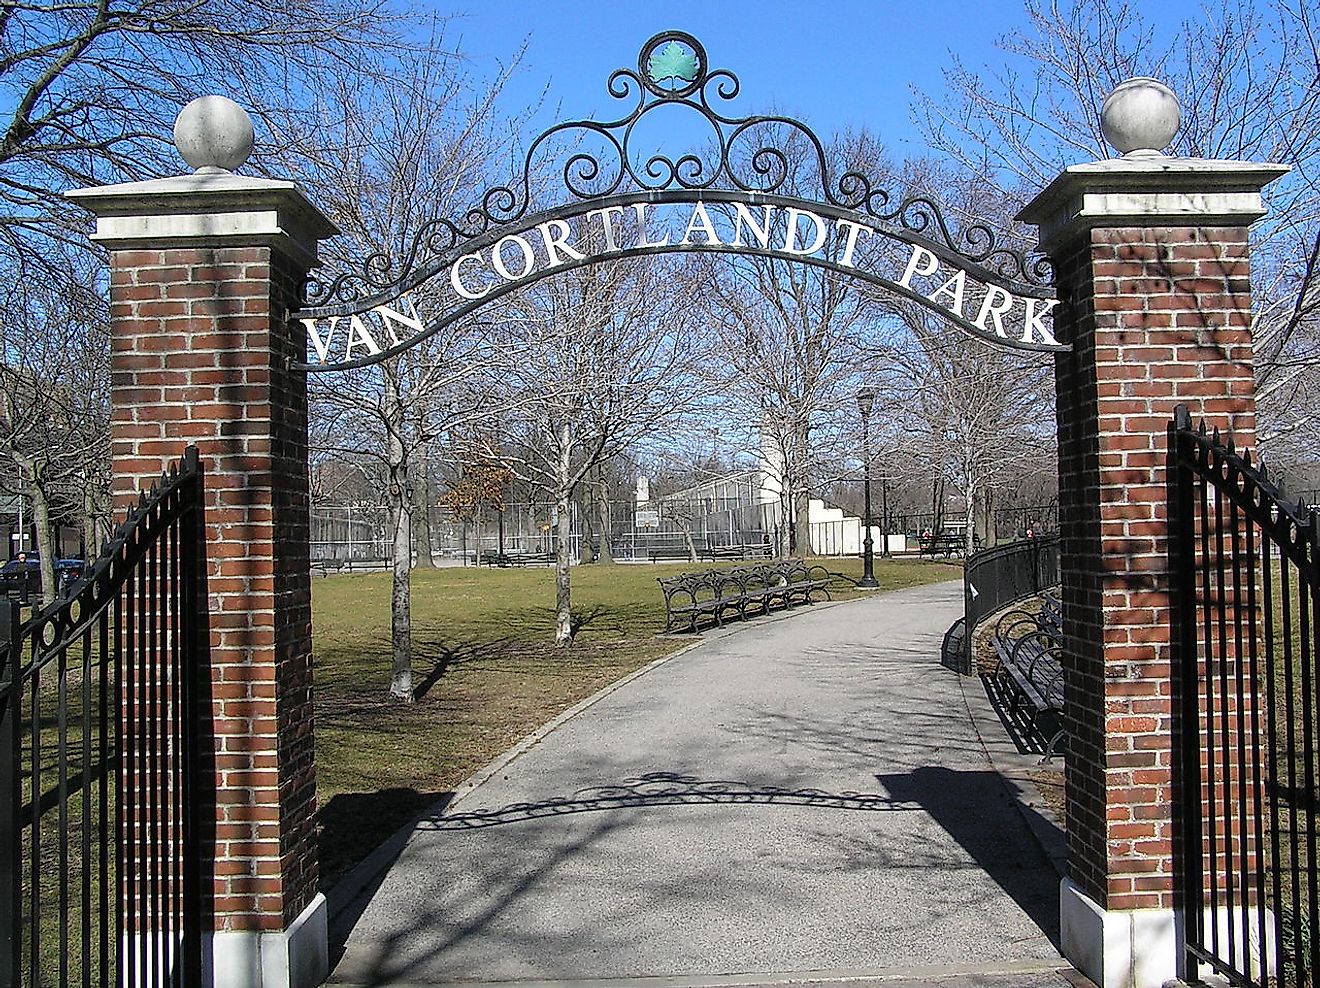 The entrance to Van Cortlandt Park in Kingsbridge/Riverdale. The park is located at the last stop of the Number 1 subway line. Image credit: Anthony22/Wikimedia.org